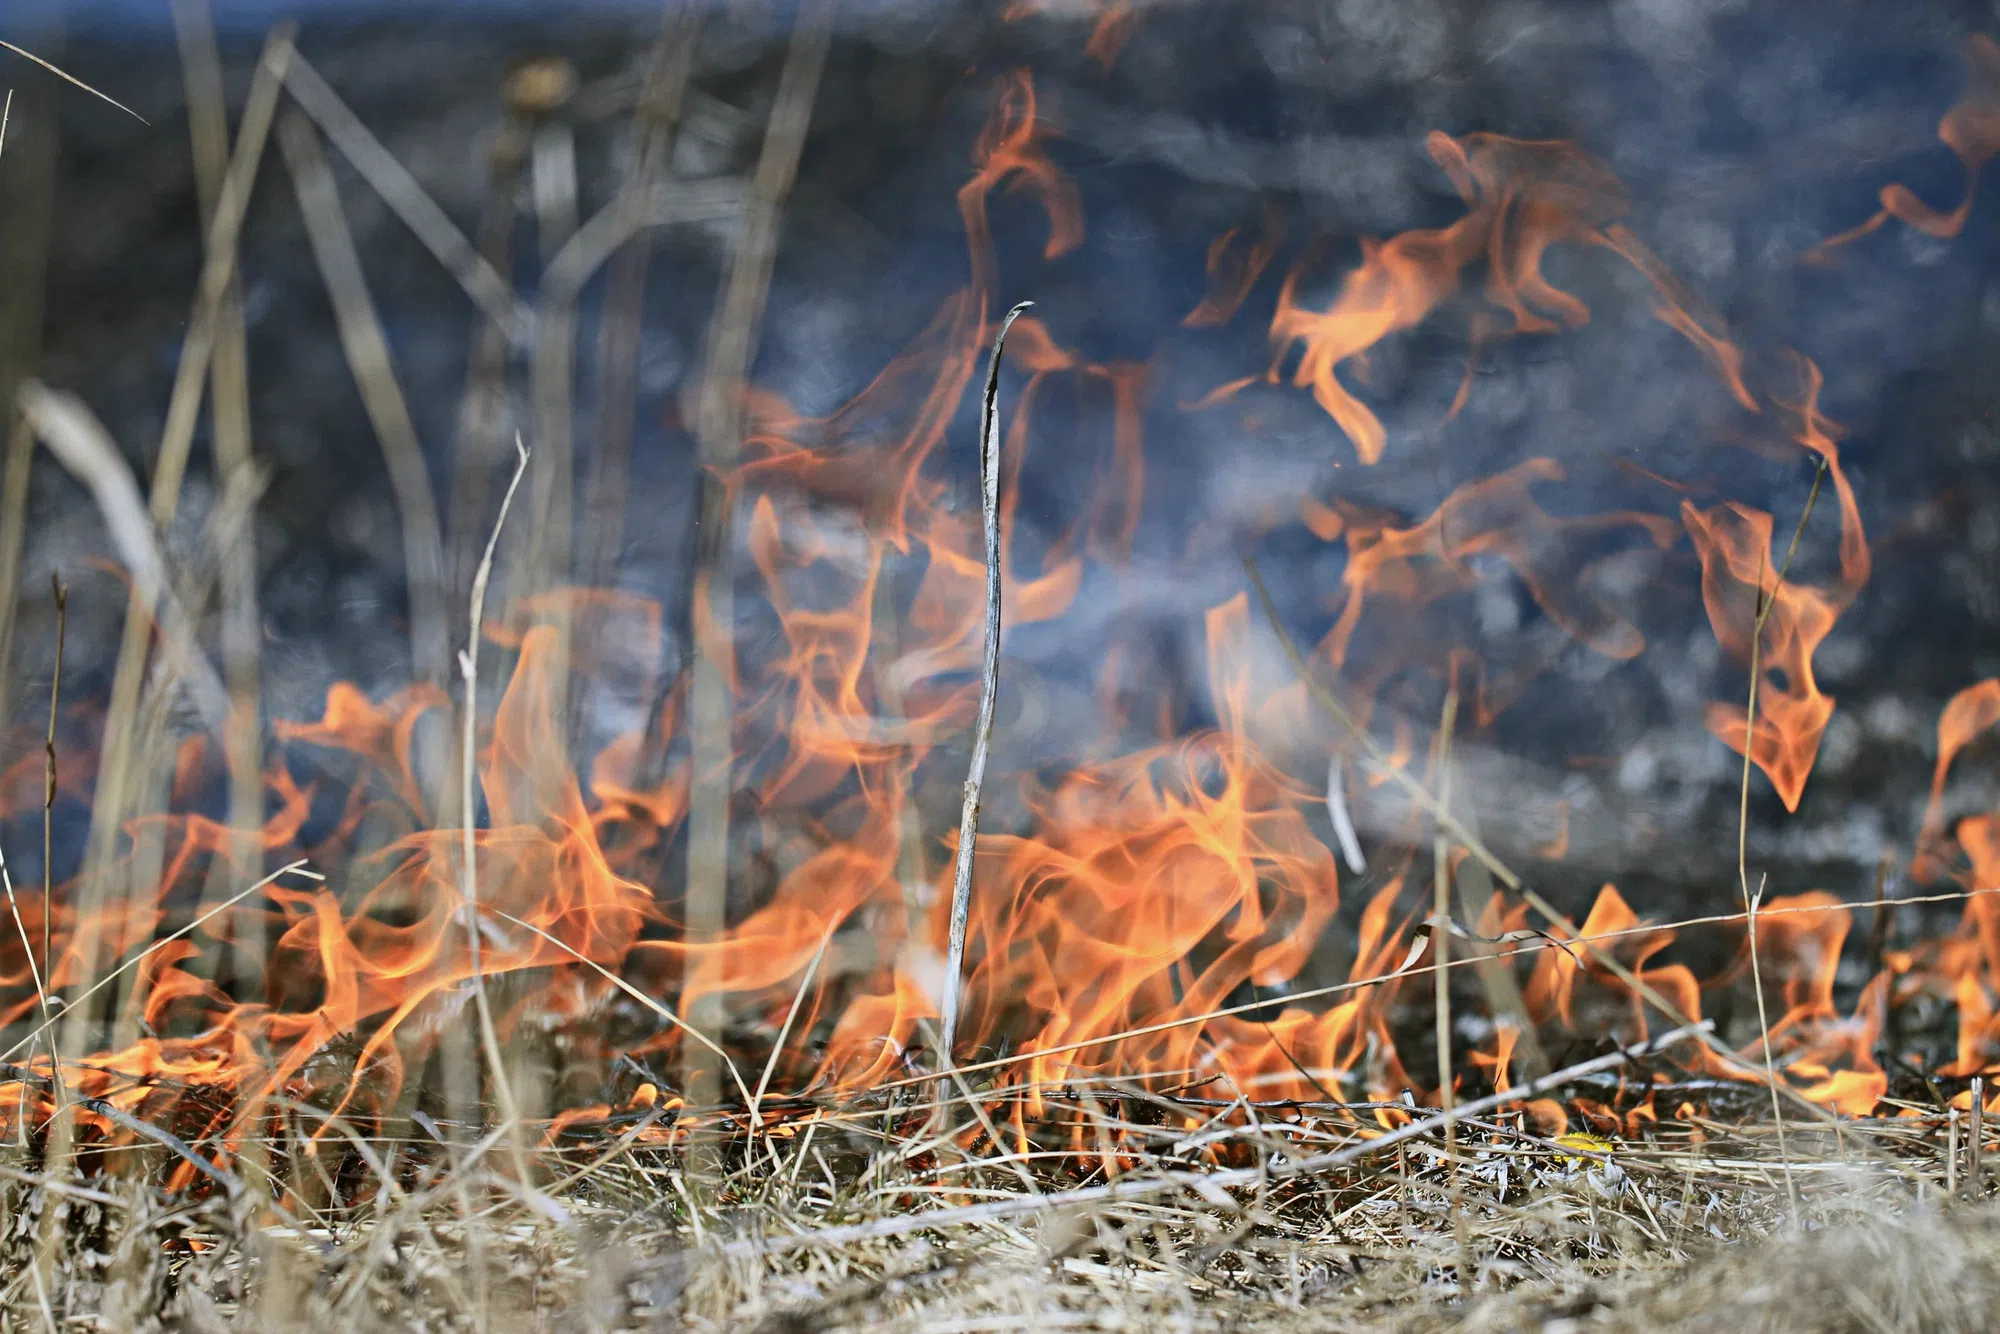 Burn ban in effect for most of N.S.